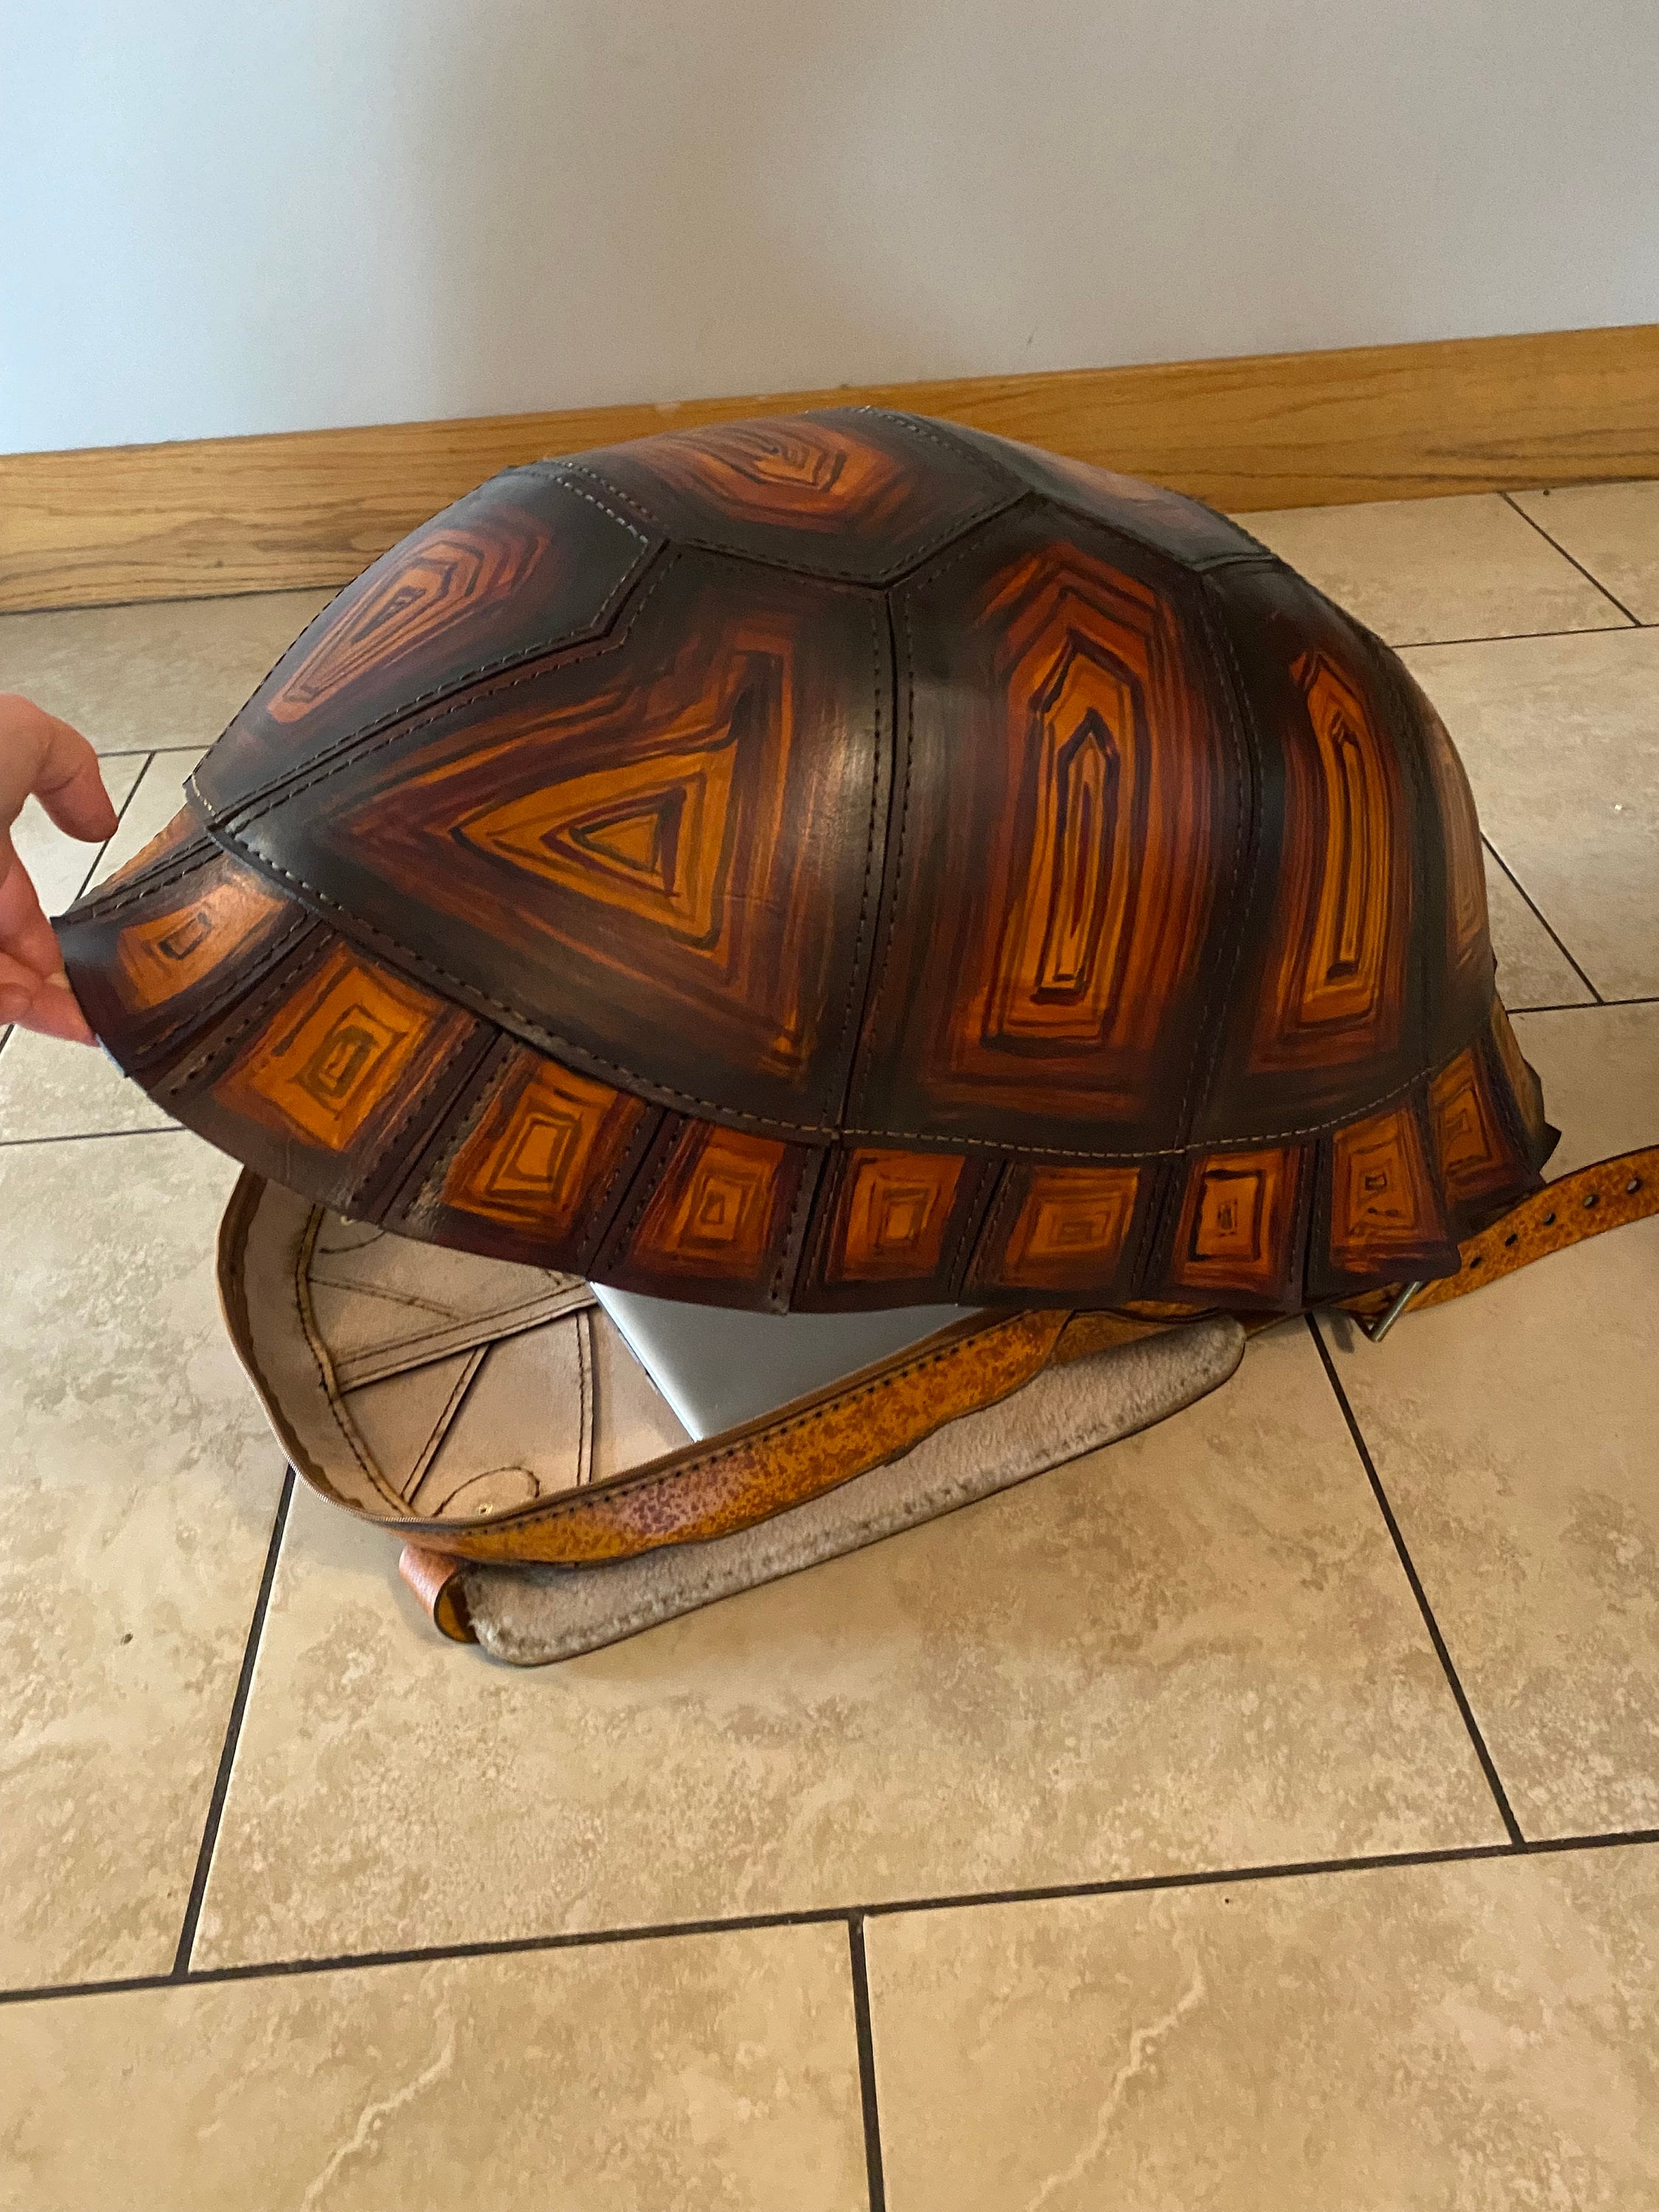 XL Extra Large Leather Turtle Tortoise Backpack Bag Purse 